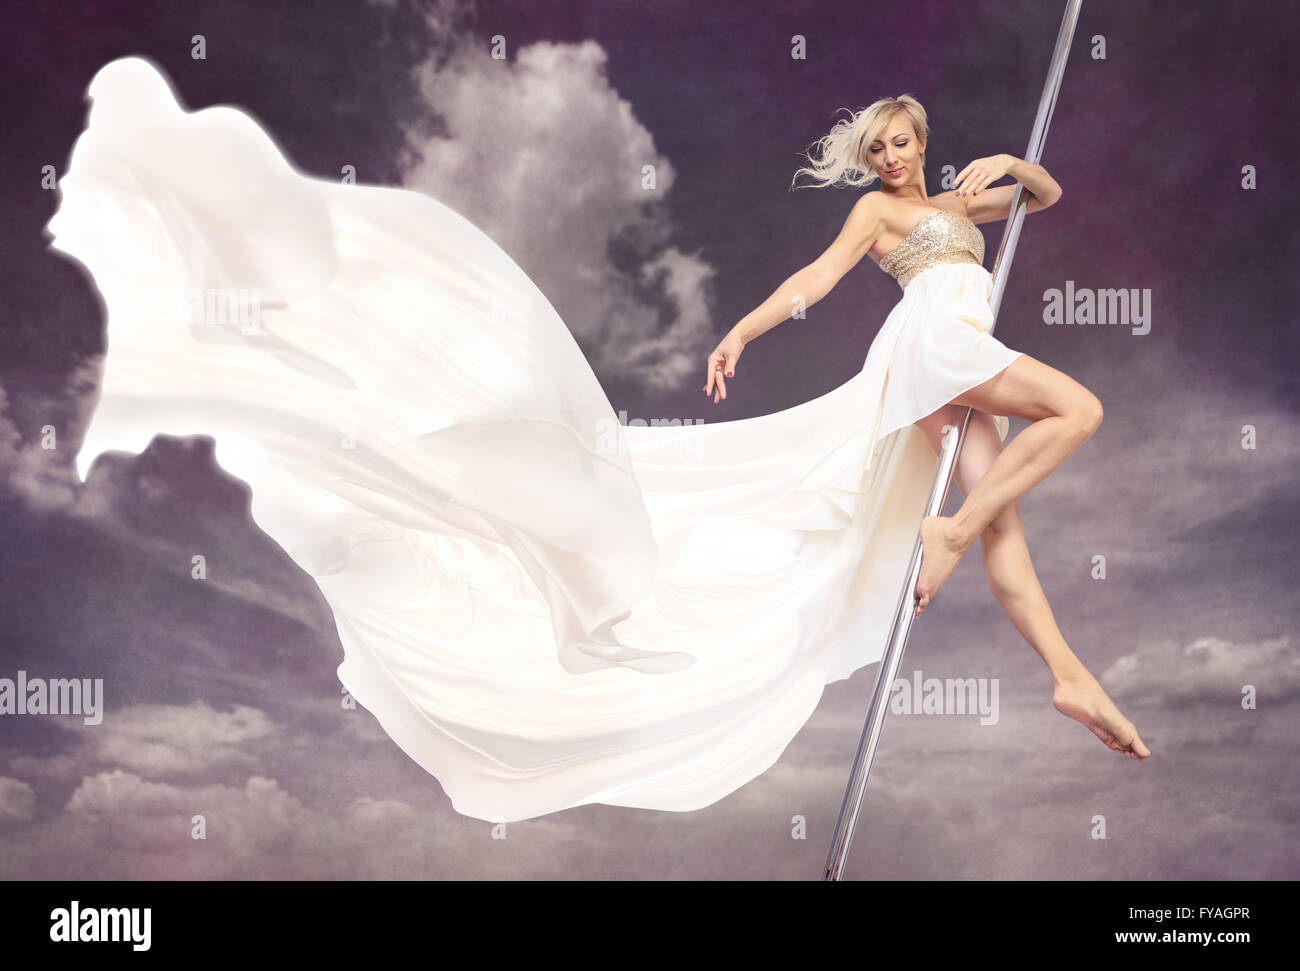 a women in a dress pole dancing in front of sky Stock Photo